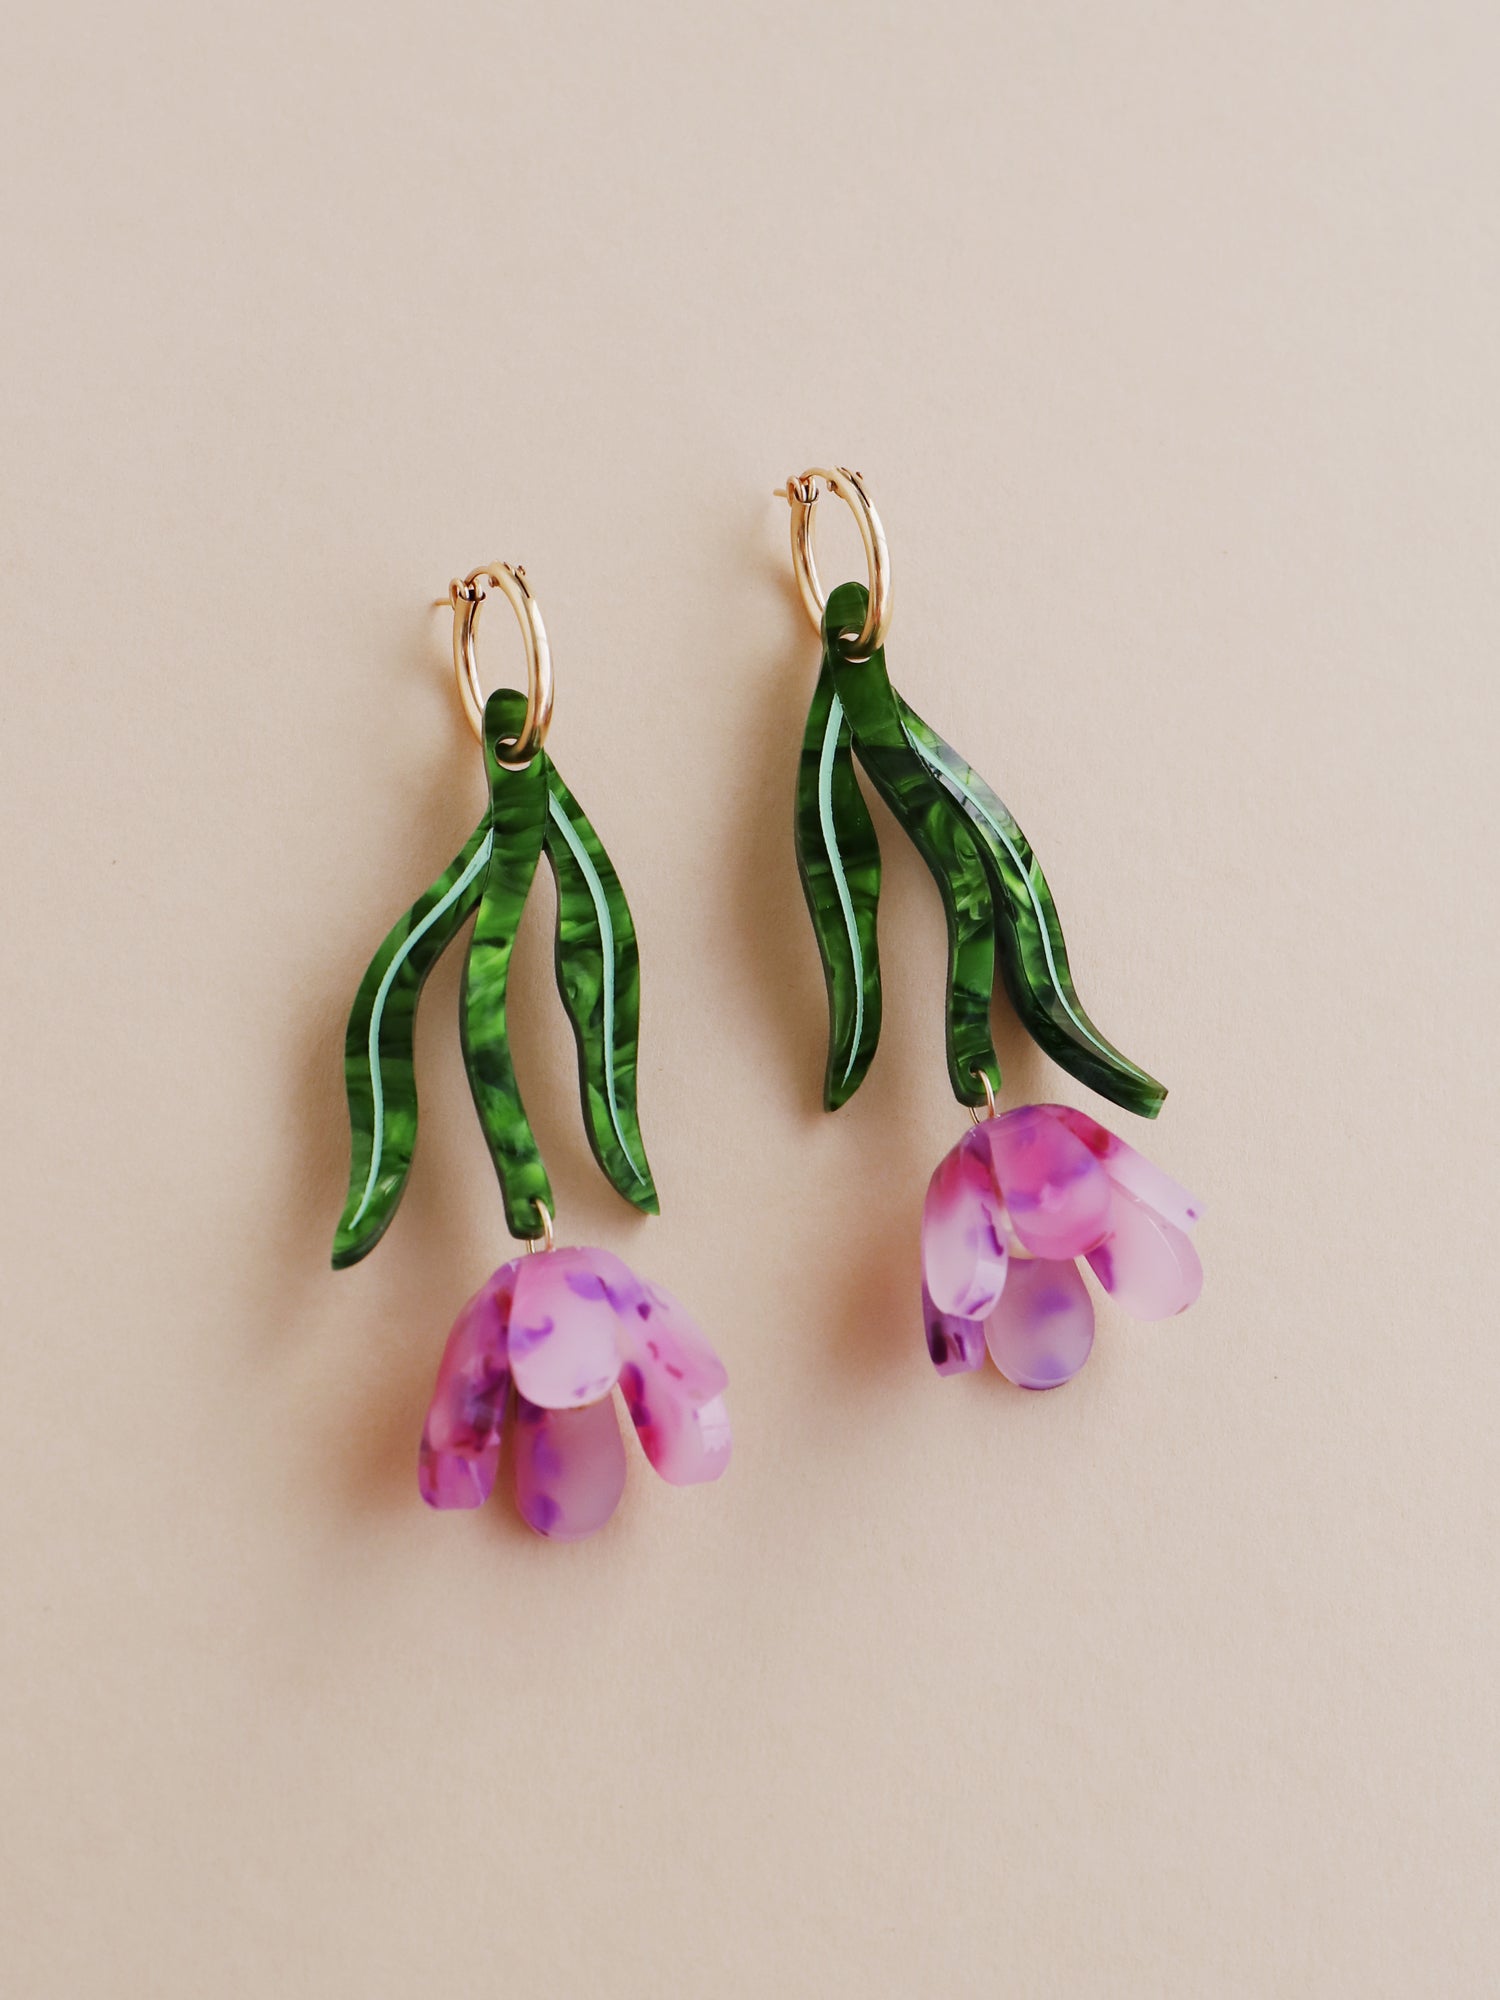 Purple & green sculptural tulip statement hoop earrings. Made from heat-formed acrylic with high quality glass pearls and 14k gold-filled findings. Handmade in the UK by Wolf & Moon.